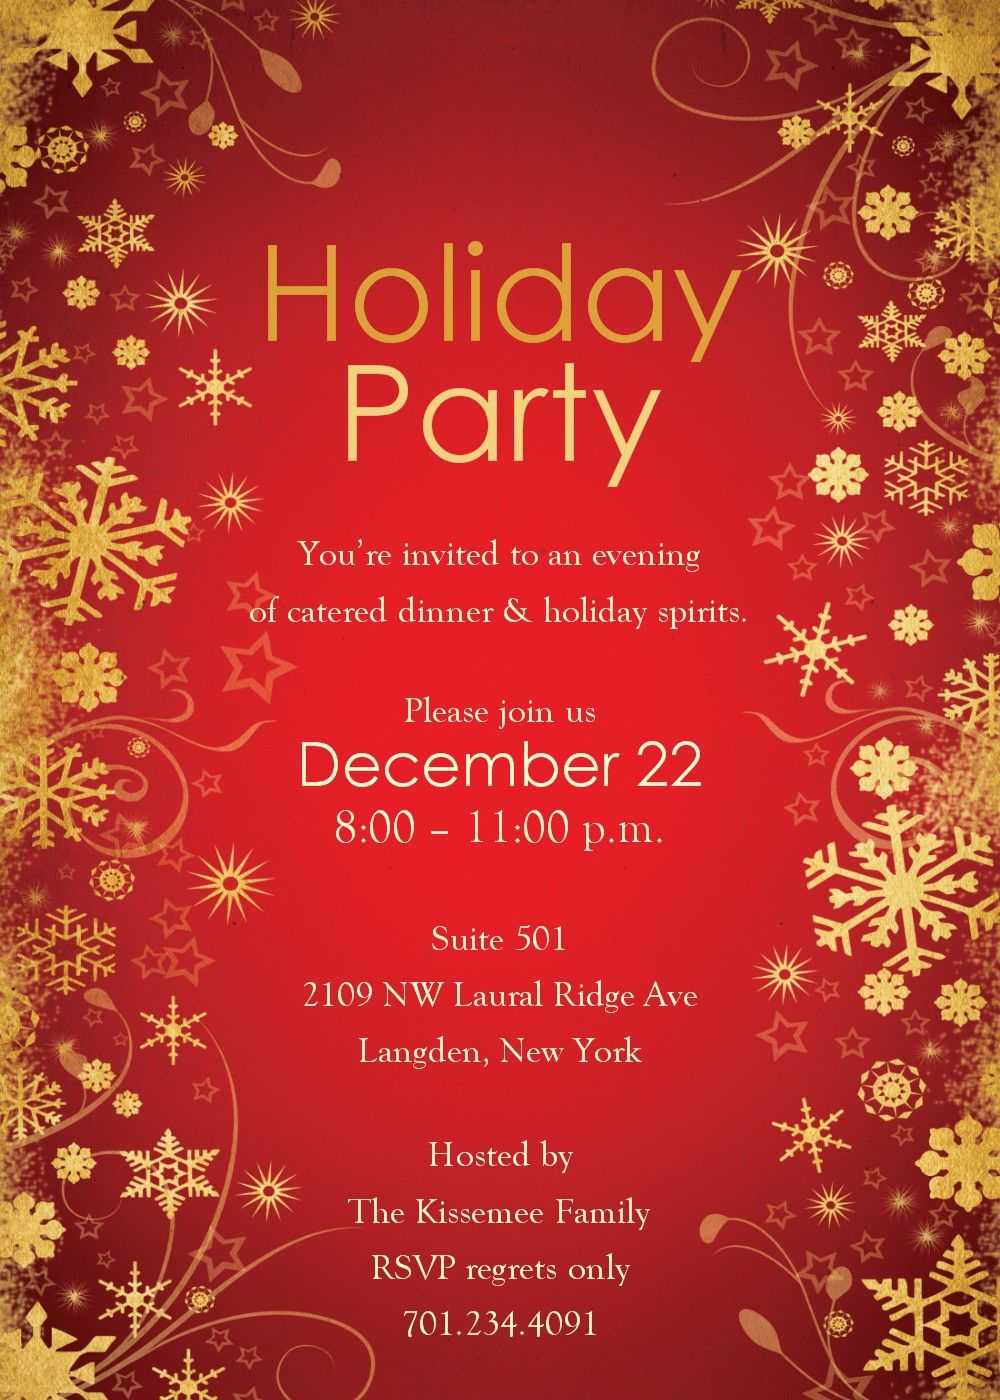 Christmas Party Invitations Templates Word | Christmas Party With Free Christmas Invitation Templates For Word